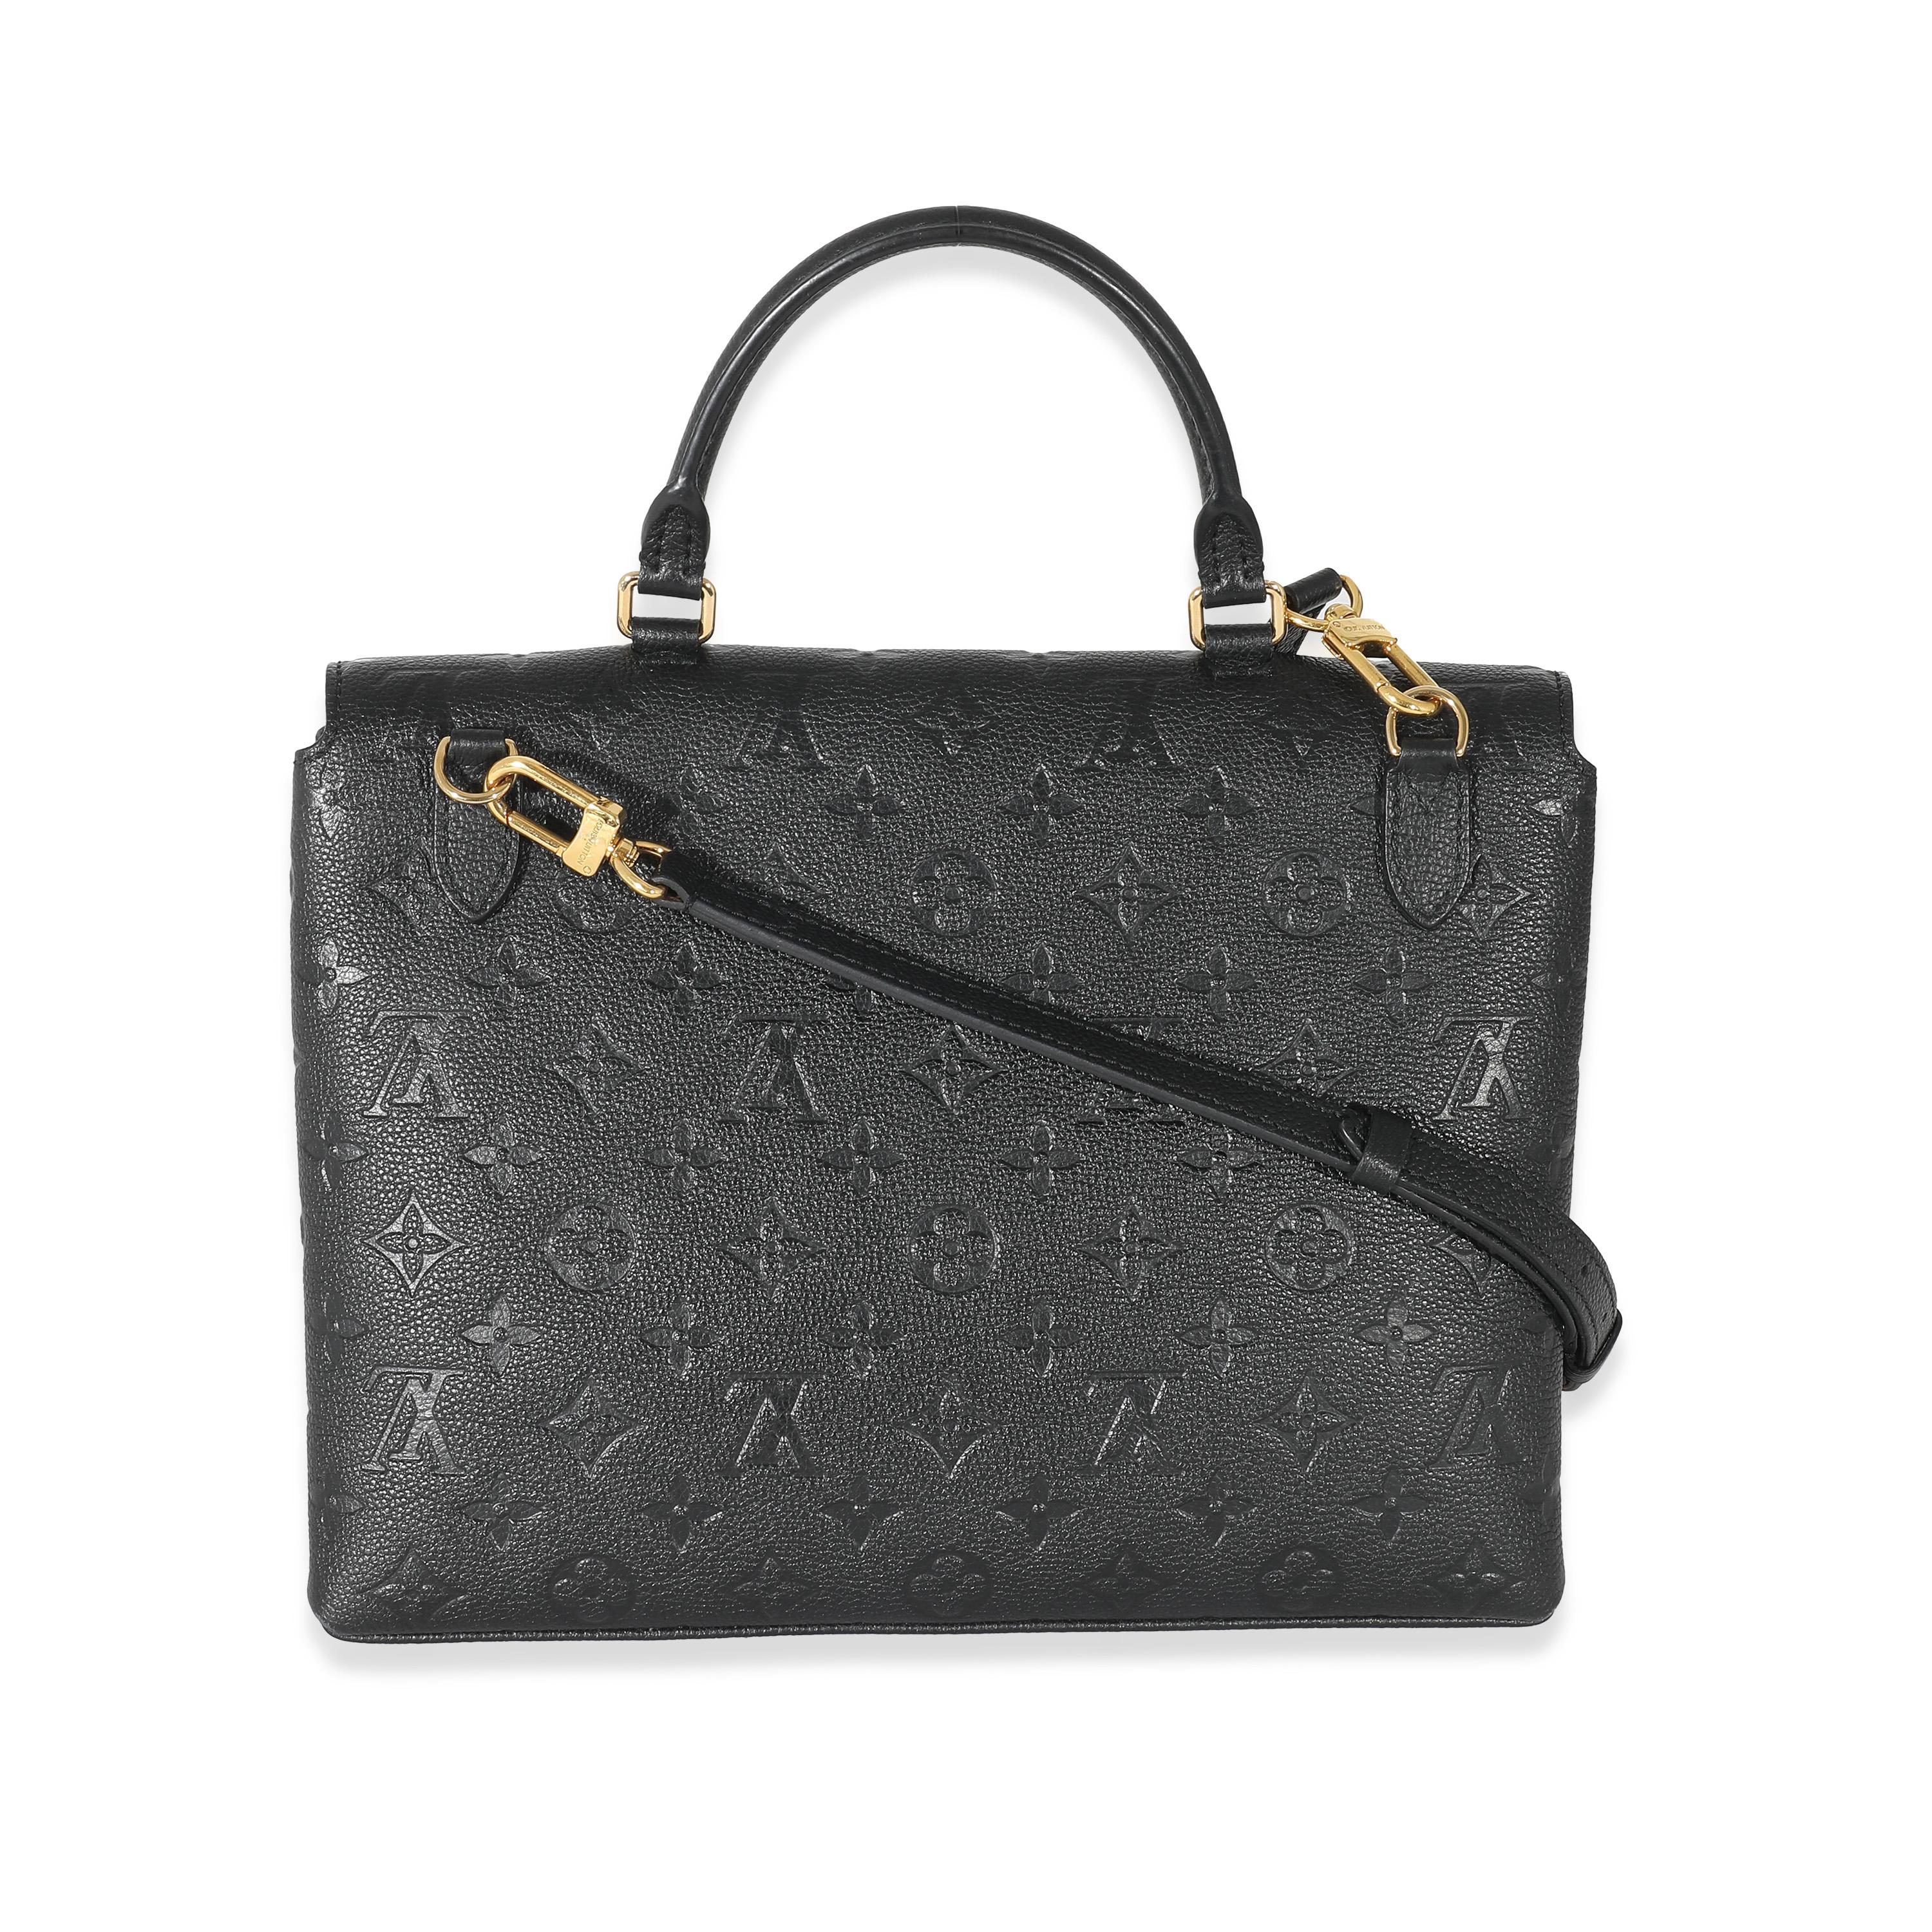 Listing Title: Louis Vuitton Black Monogram Empreinte Leather Marignan
SKU: 133631
MSRP: 2900.00 USD
Condition: Pre-owned 
Handbag Condition: Very Good
Condition Comments: Item is in very good condition with minor signs of wear. Scratching and